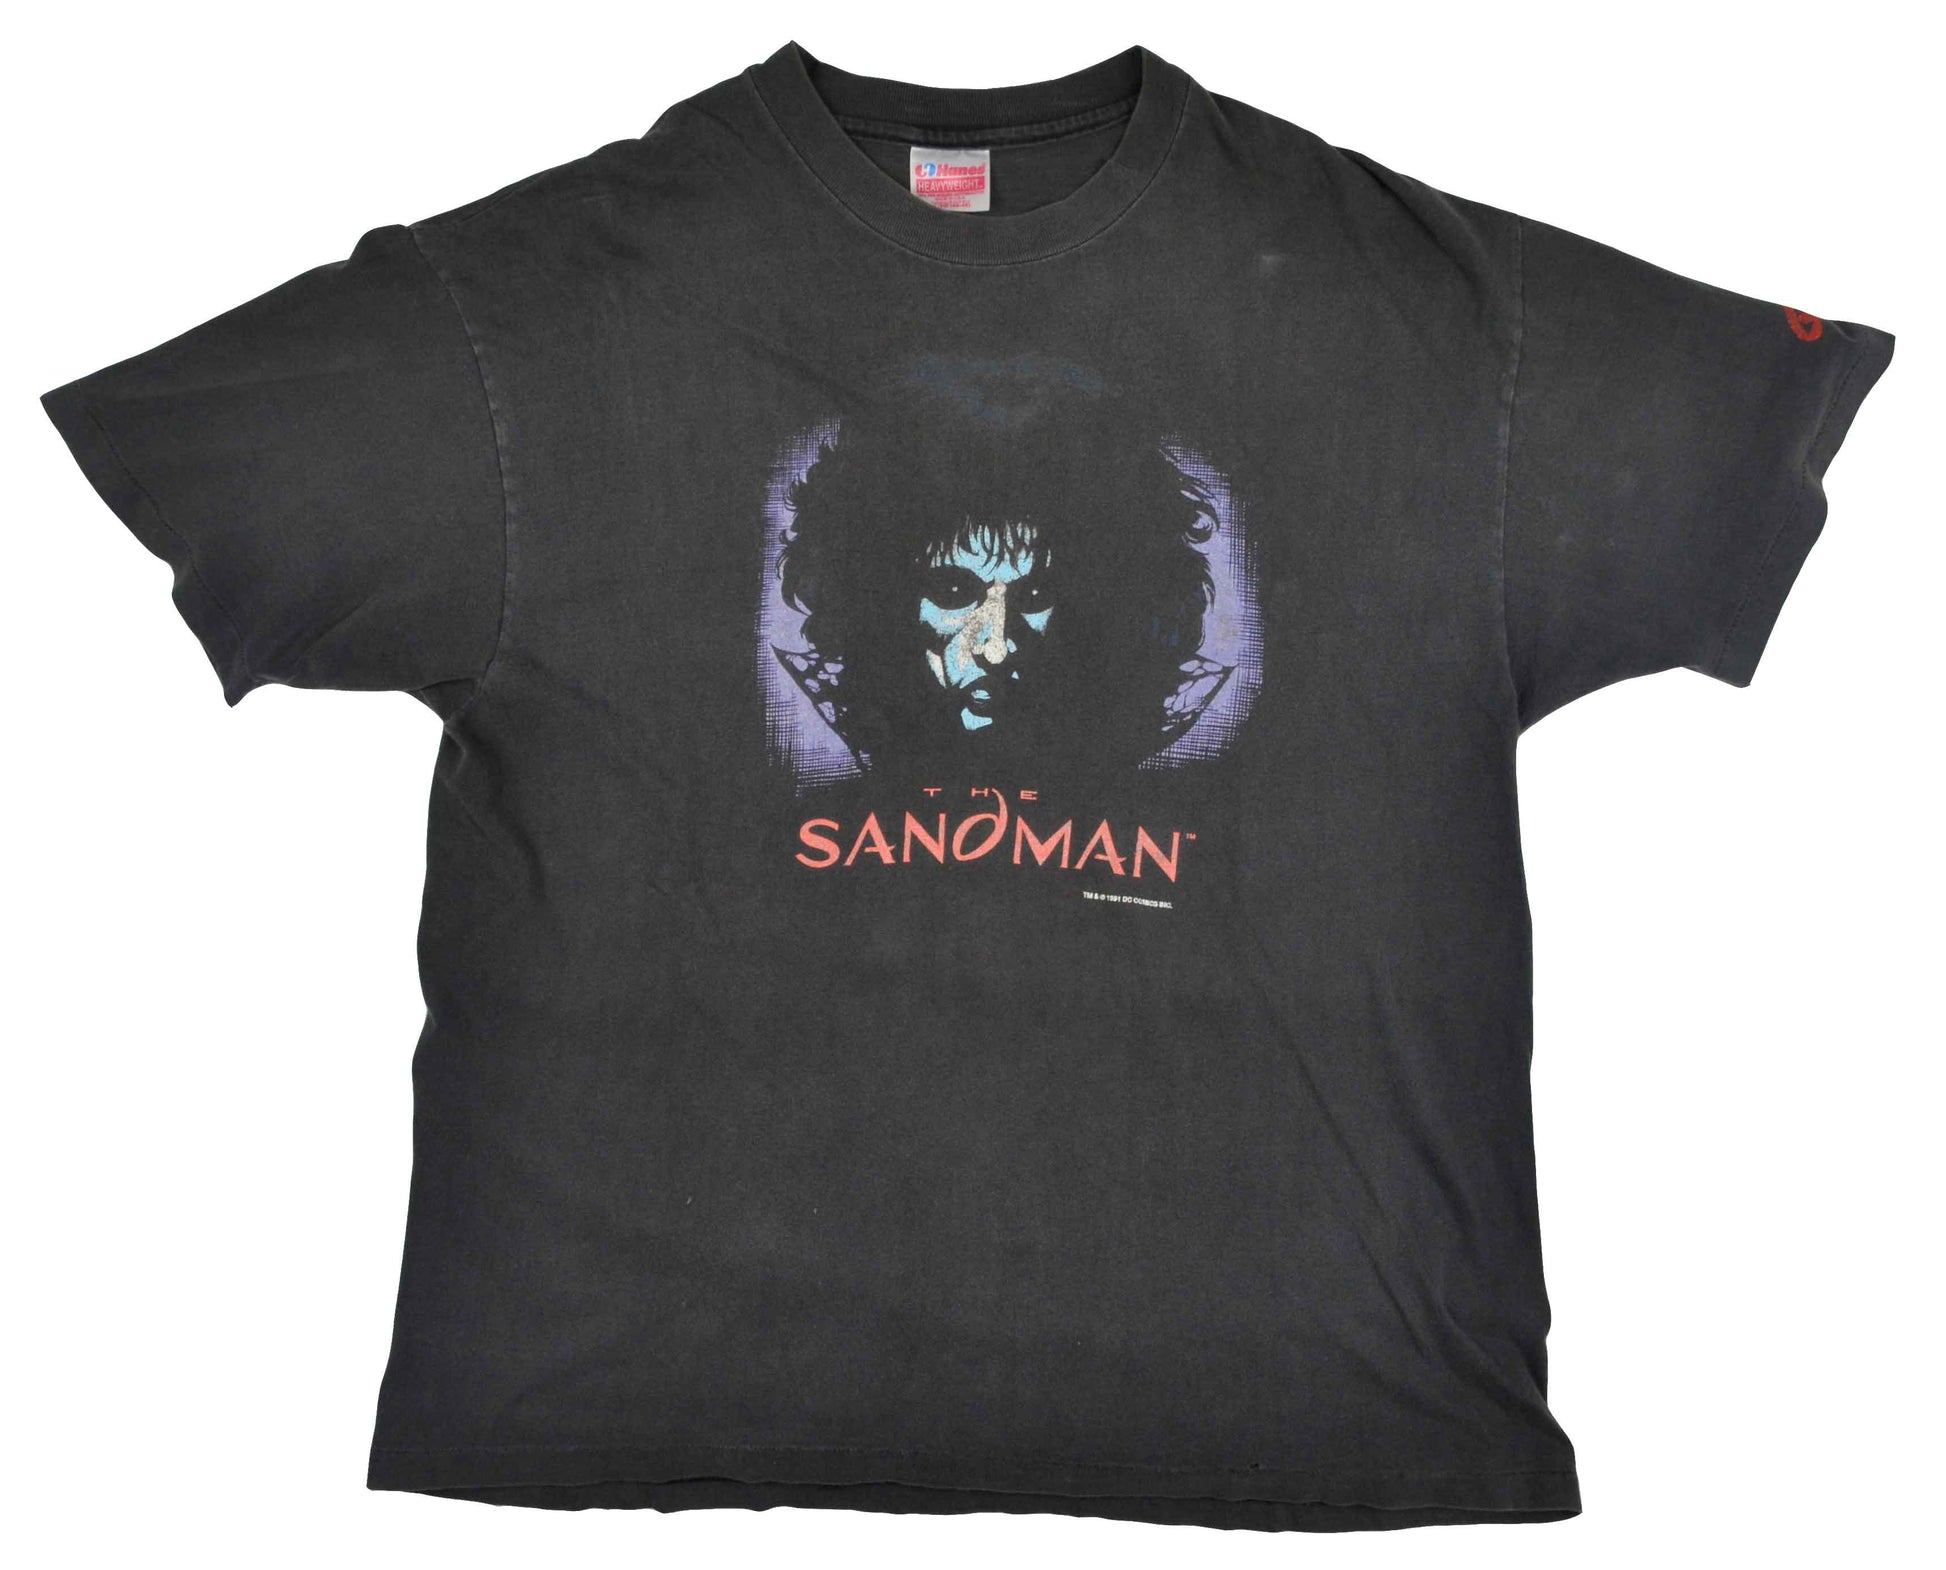 Vintage Comic T-Shirt 1991 The Sandman "Vertigo"  "I don't know. I had to be something, did it?". One of the most famous quotes from the novel. The Sandman is a story about stories and how Morpheus, the Lord of Dreams, is captured and subsequently learns that sometimes change is inevitable. The Sandman was one of the first few graphic novels ever to be on the New York Times Best Seller list.